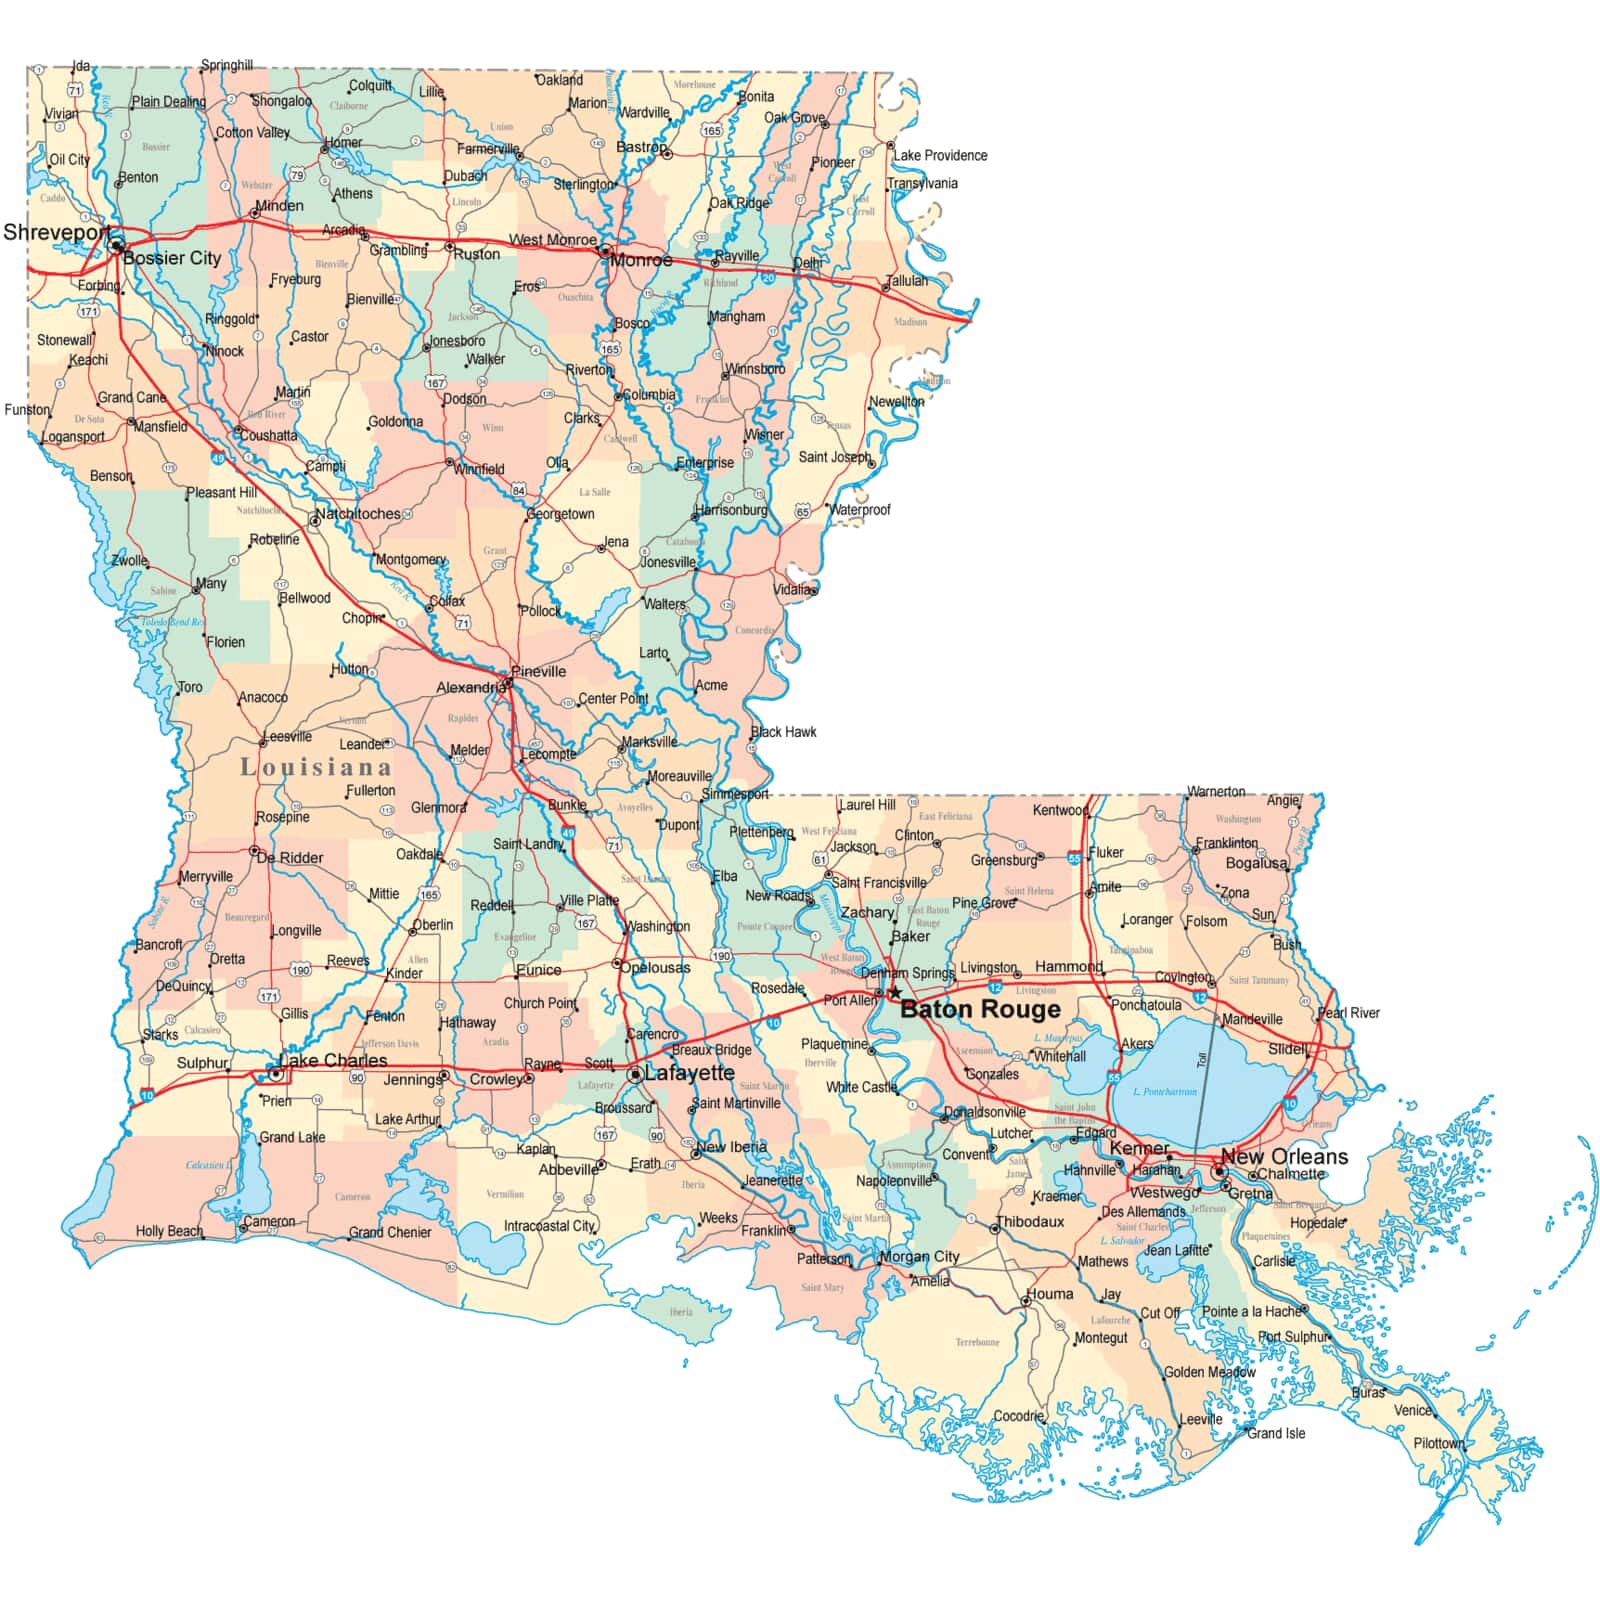 Louisiana Road Map Square ?format=jpg&scale.option=fill&scale.width=1600&quality=60